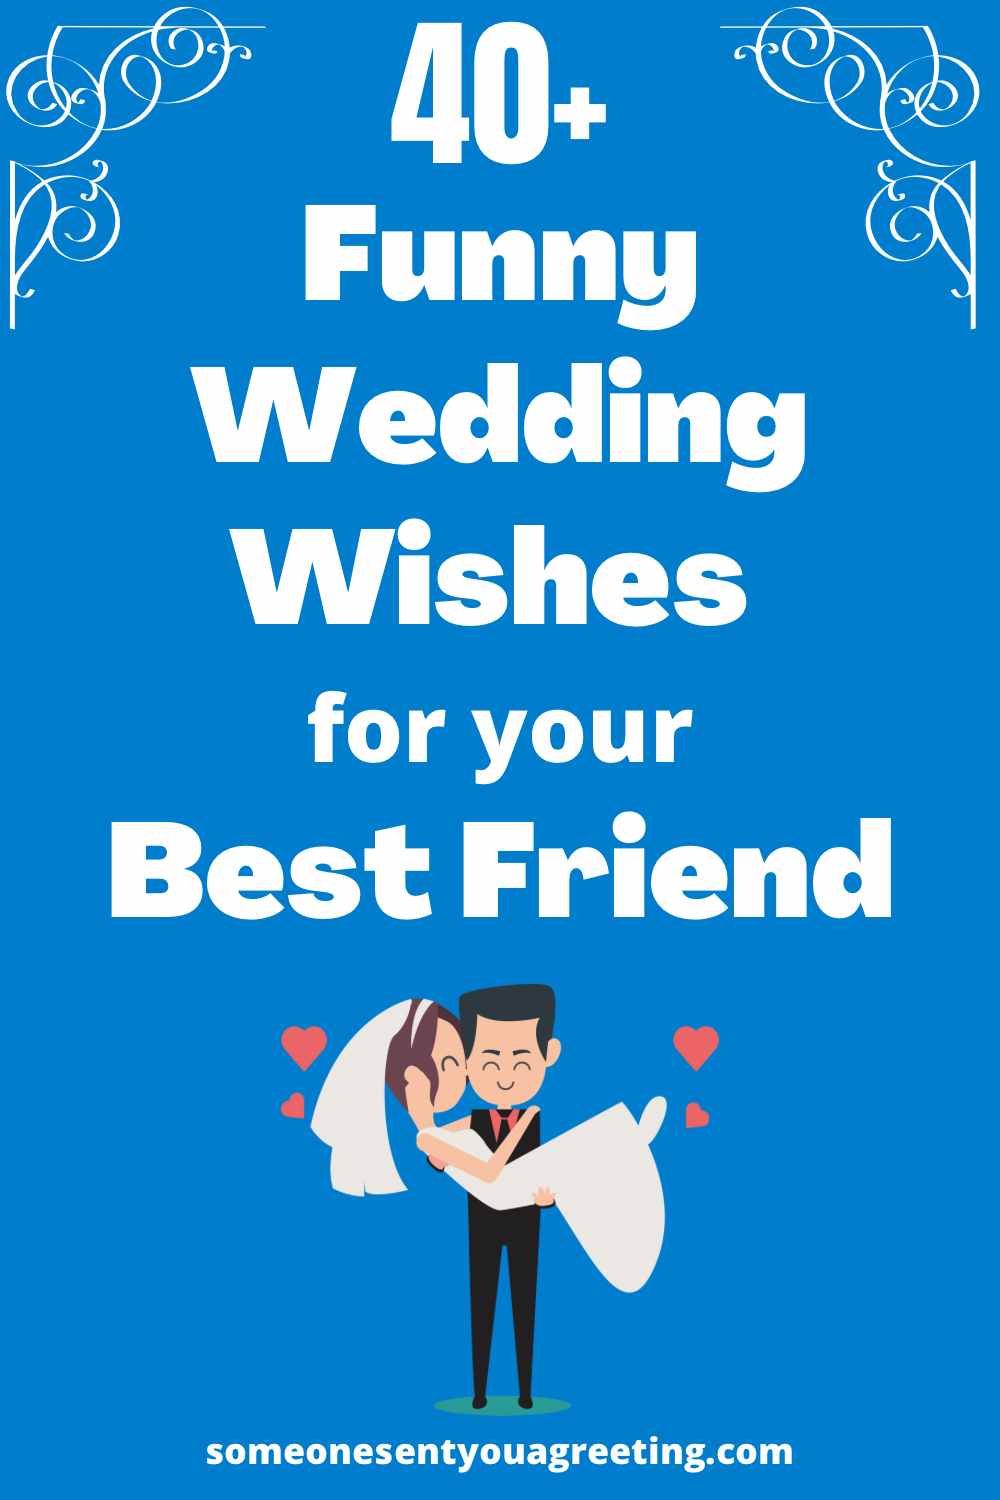 41+ Funny Wedding Wishes for your Best Friend - Someone Sent You A ...